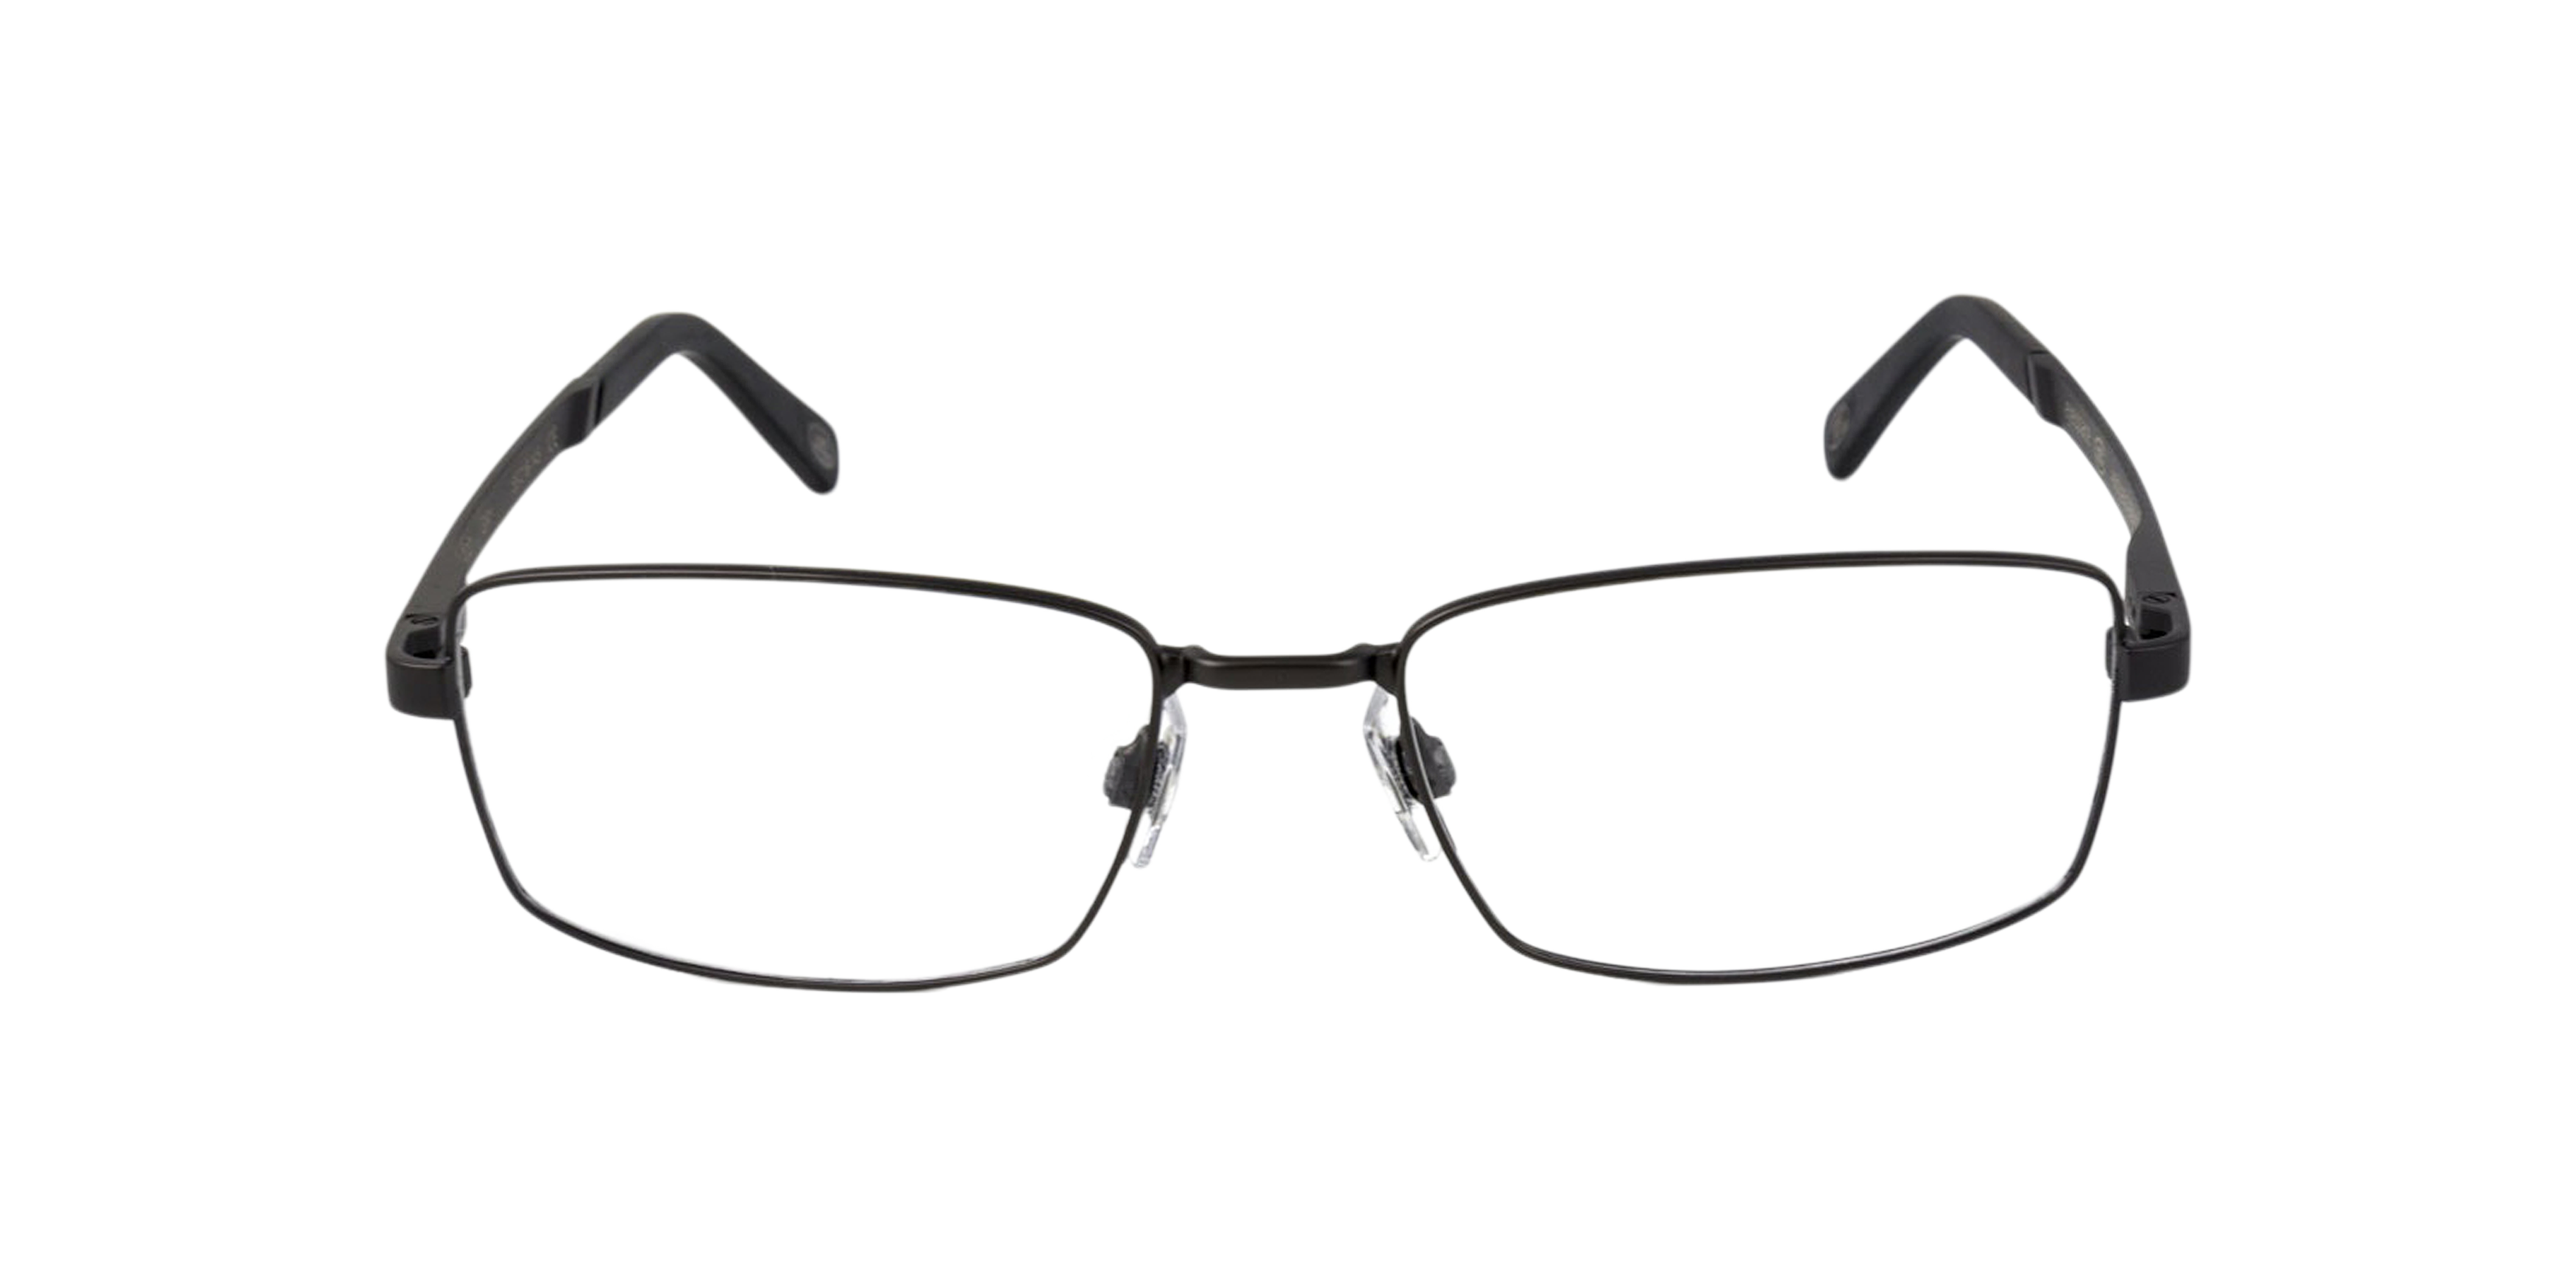 Front Land Rover Todd (GRY) Glasses Transparent / Grey